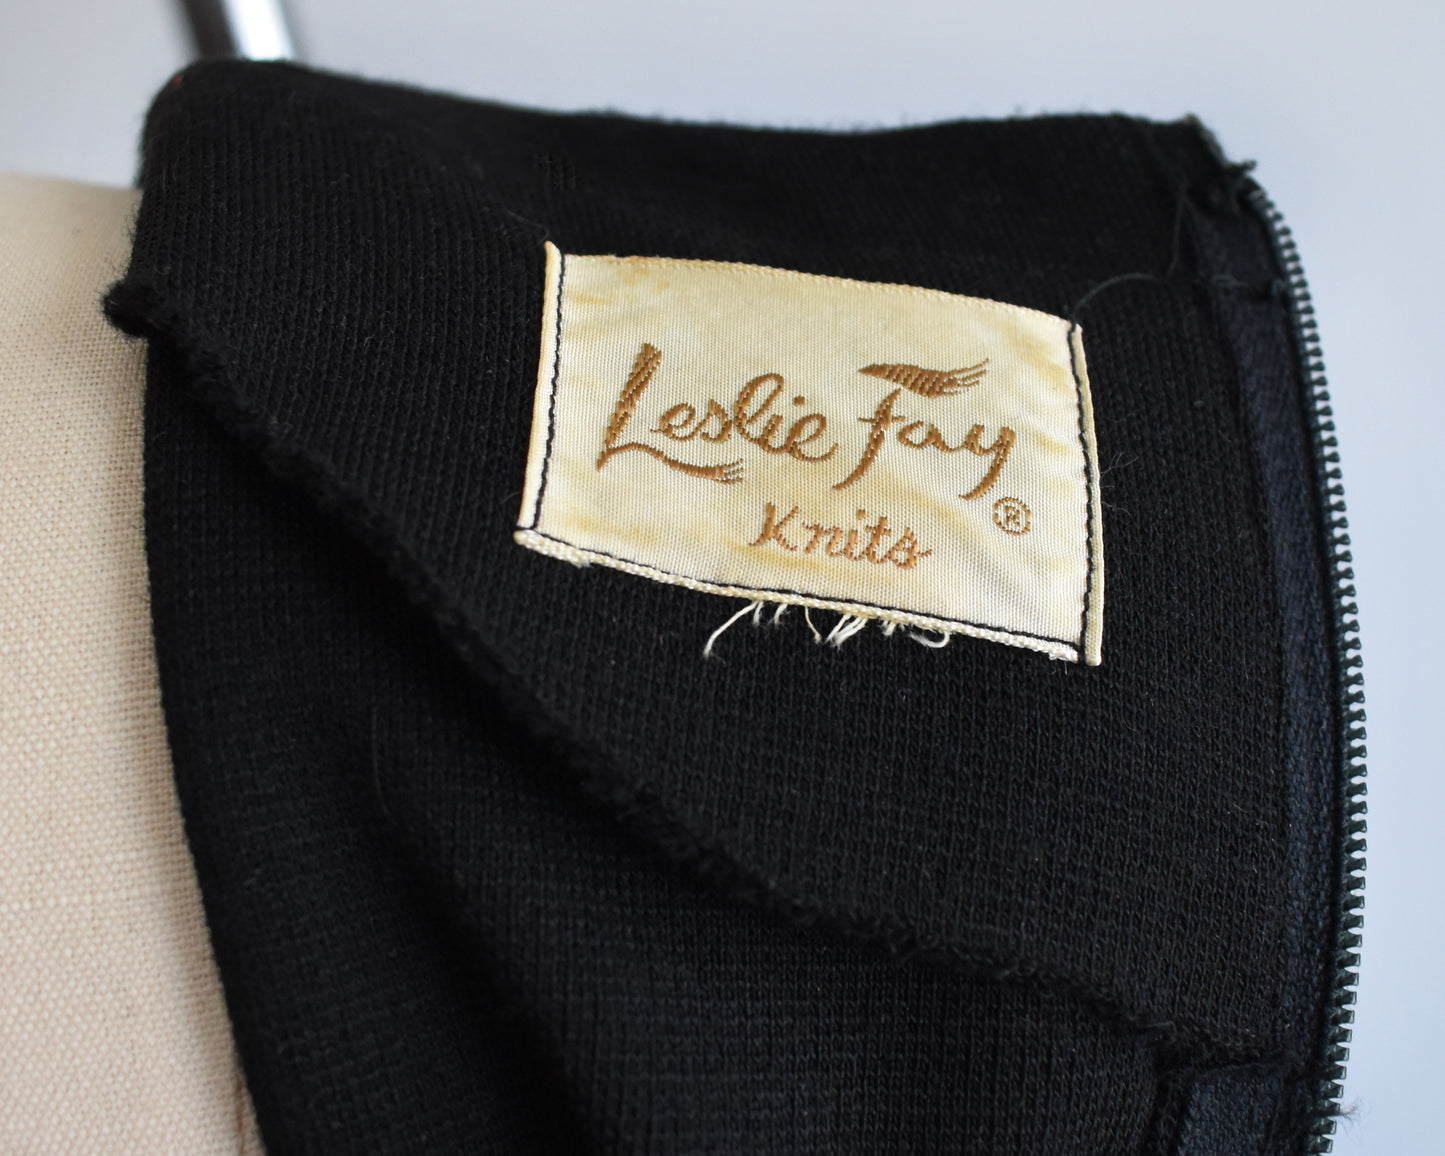 close up of the tag which says Leslie Fay Knits